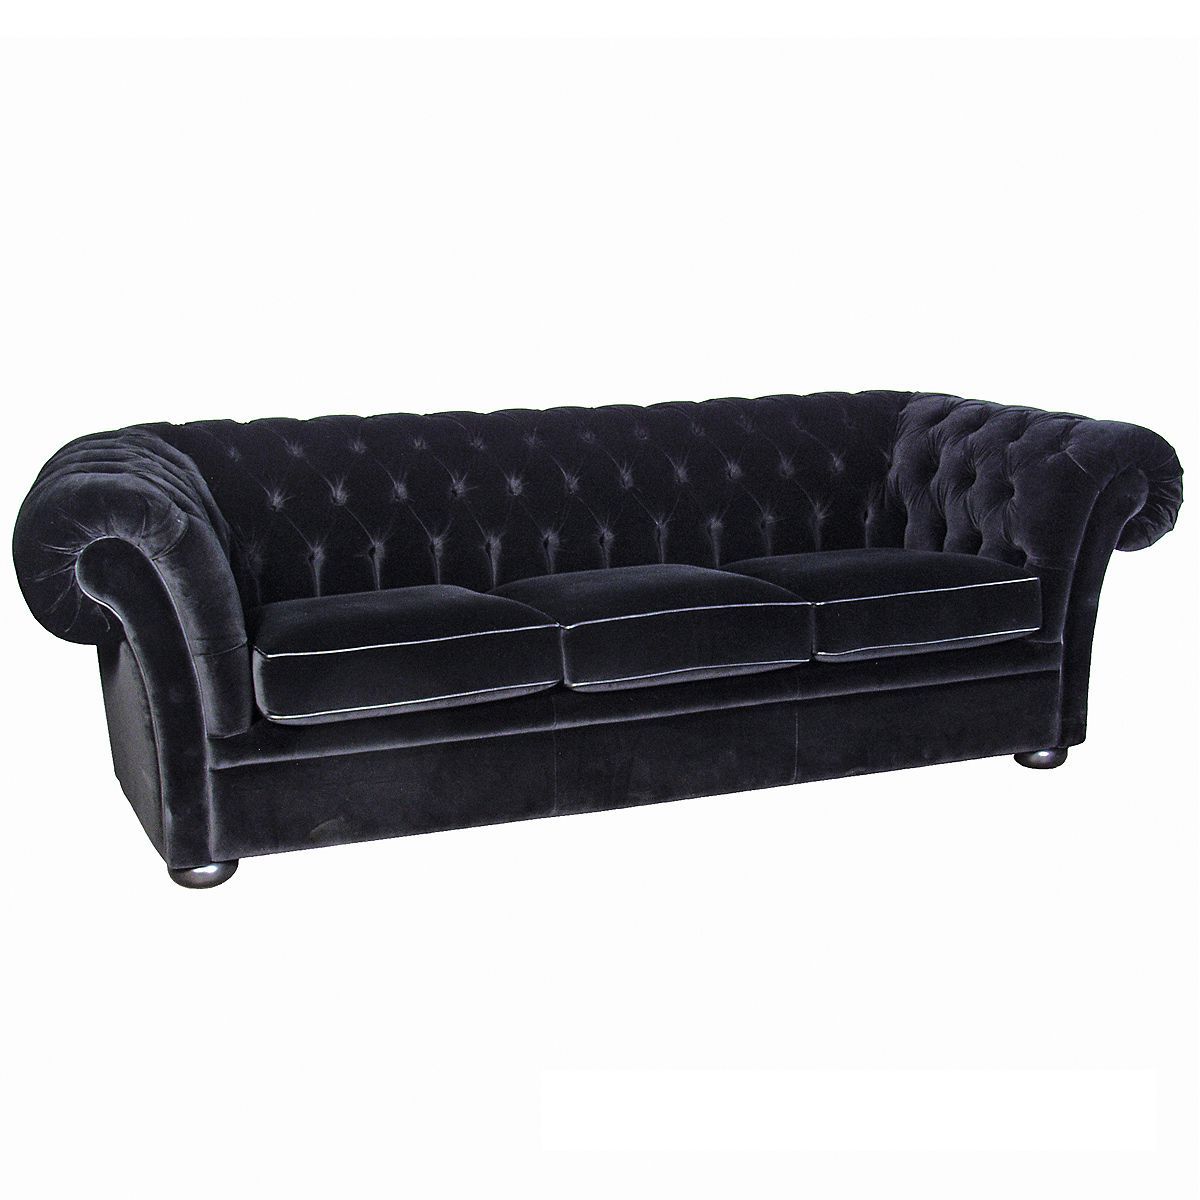 Most Recent 4pc French Seamed Sectional Sofas Velvet Black For 2 Seater: W190 X D90 X H75cm 3 Seater: W245 X D90 X H75cm (View 5 of 25)